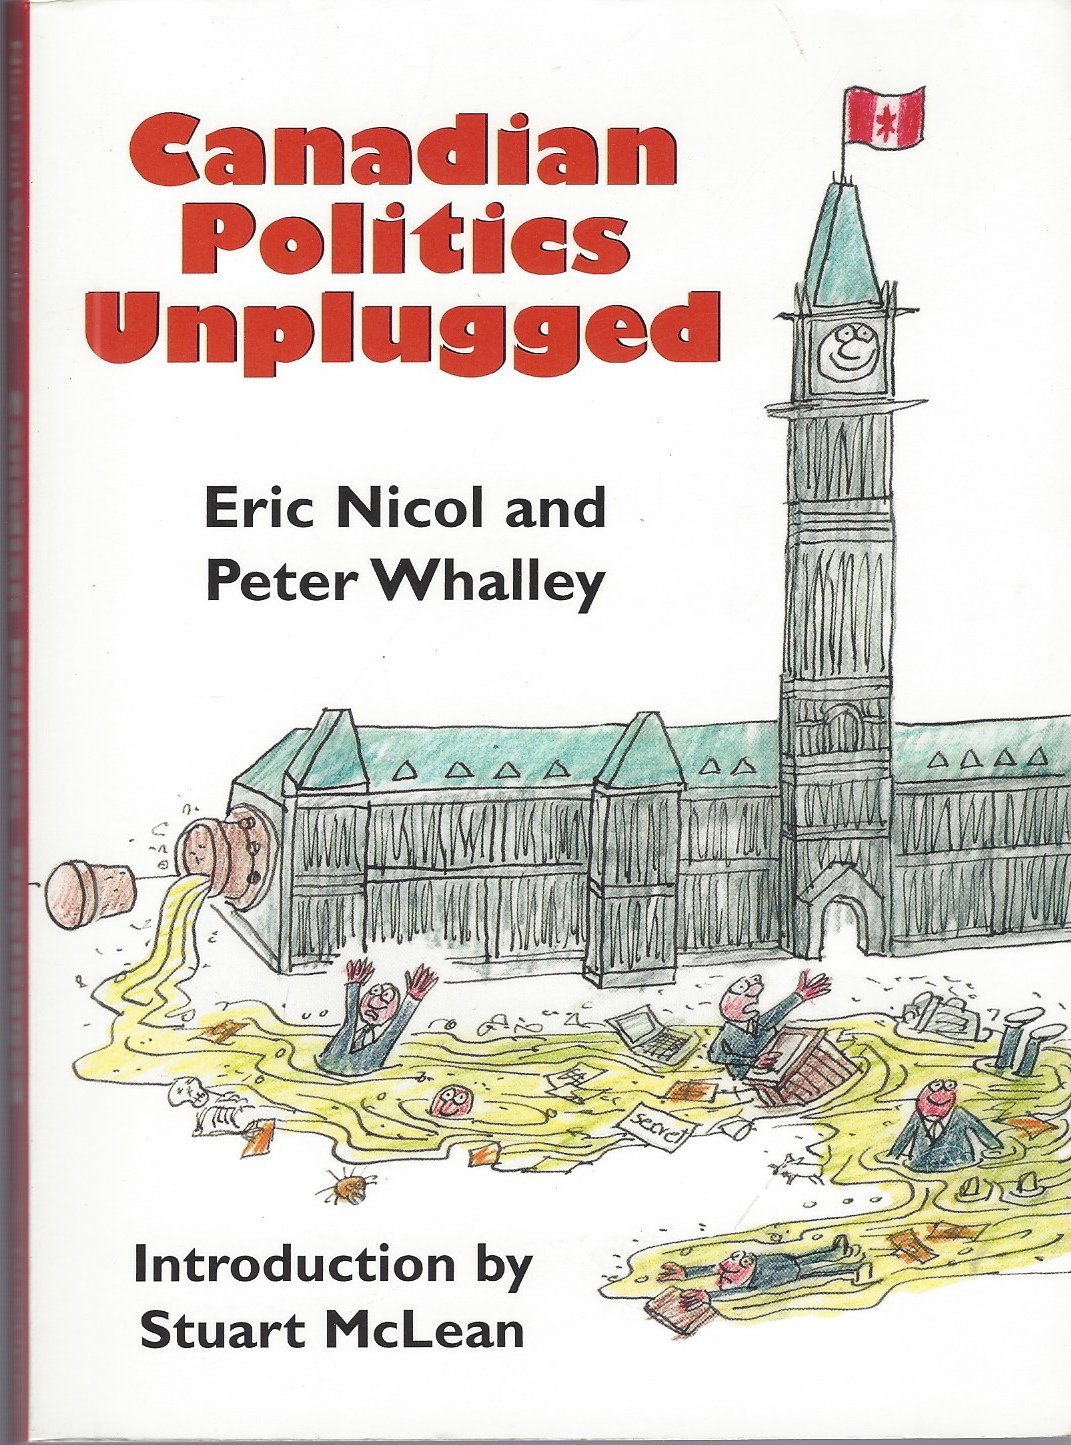 NICOL ERIC, WHALLEY PETER, INTRO: MCLEAN STUART - Canadian Politics Unplugged